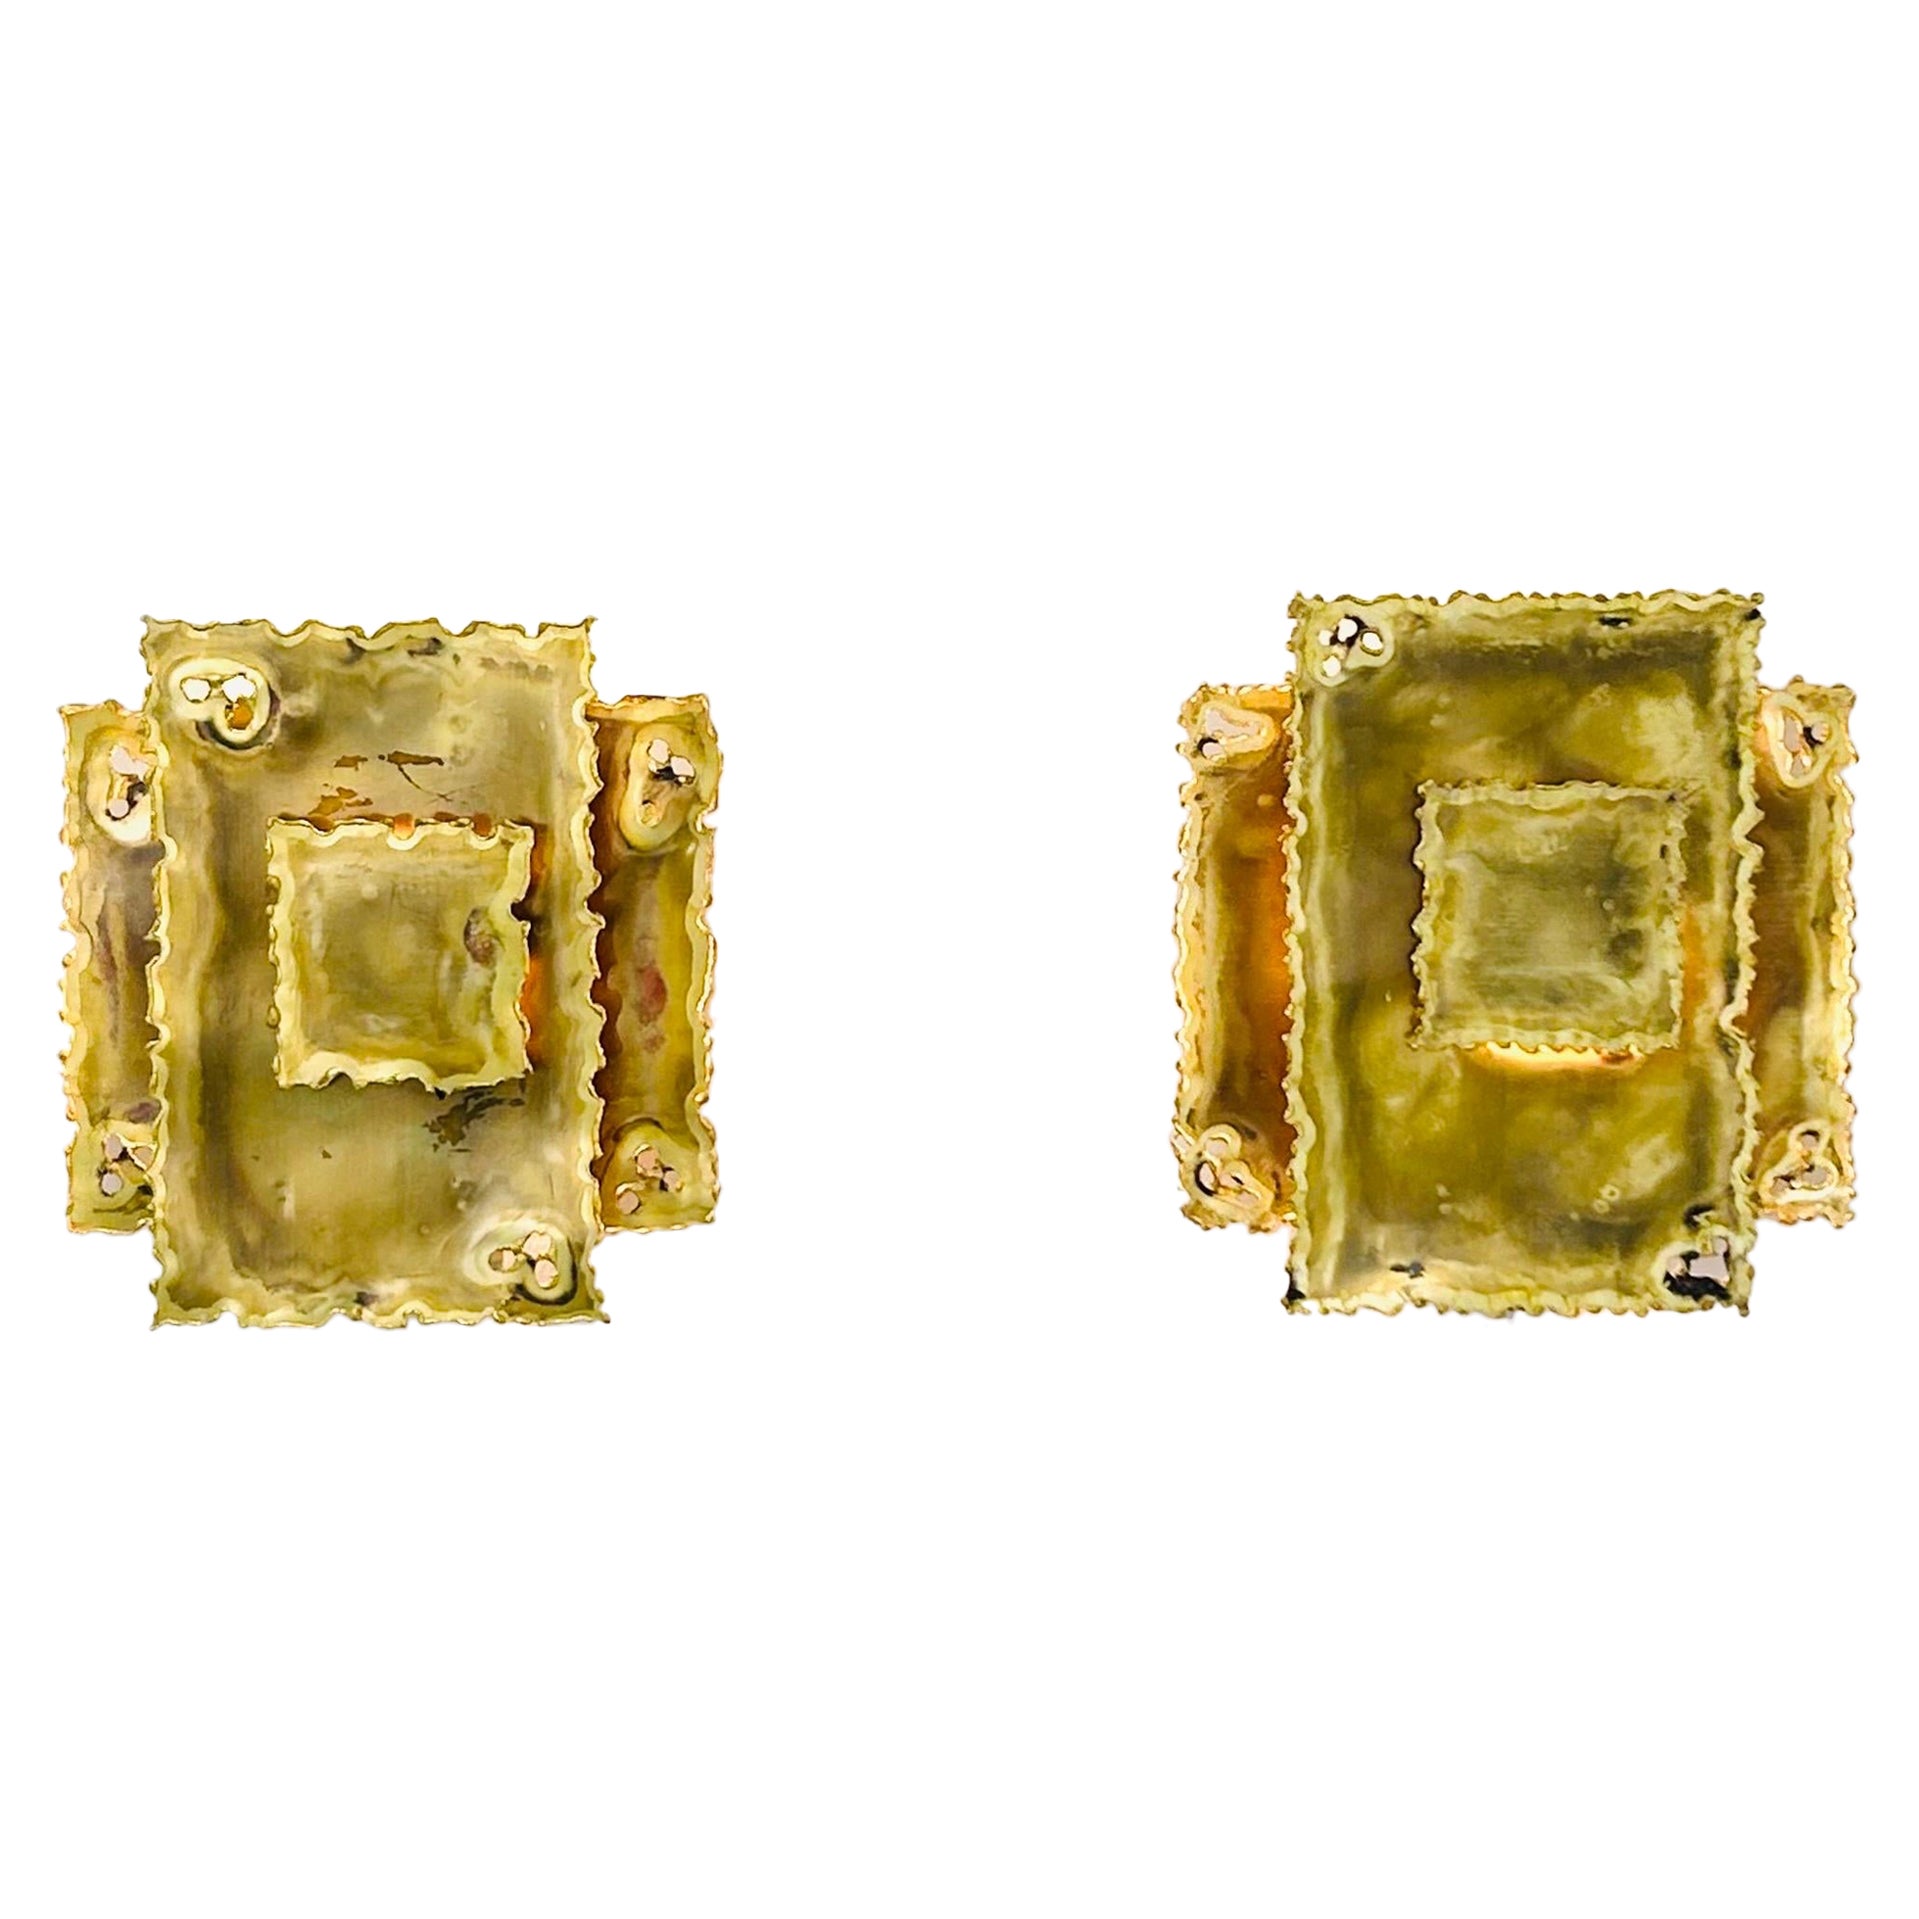 Pair of Square Brass Wall Lamps by Svend Aage Holm Sorensen, 1960s, Denmark